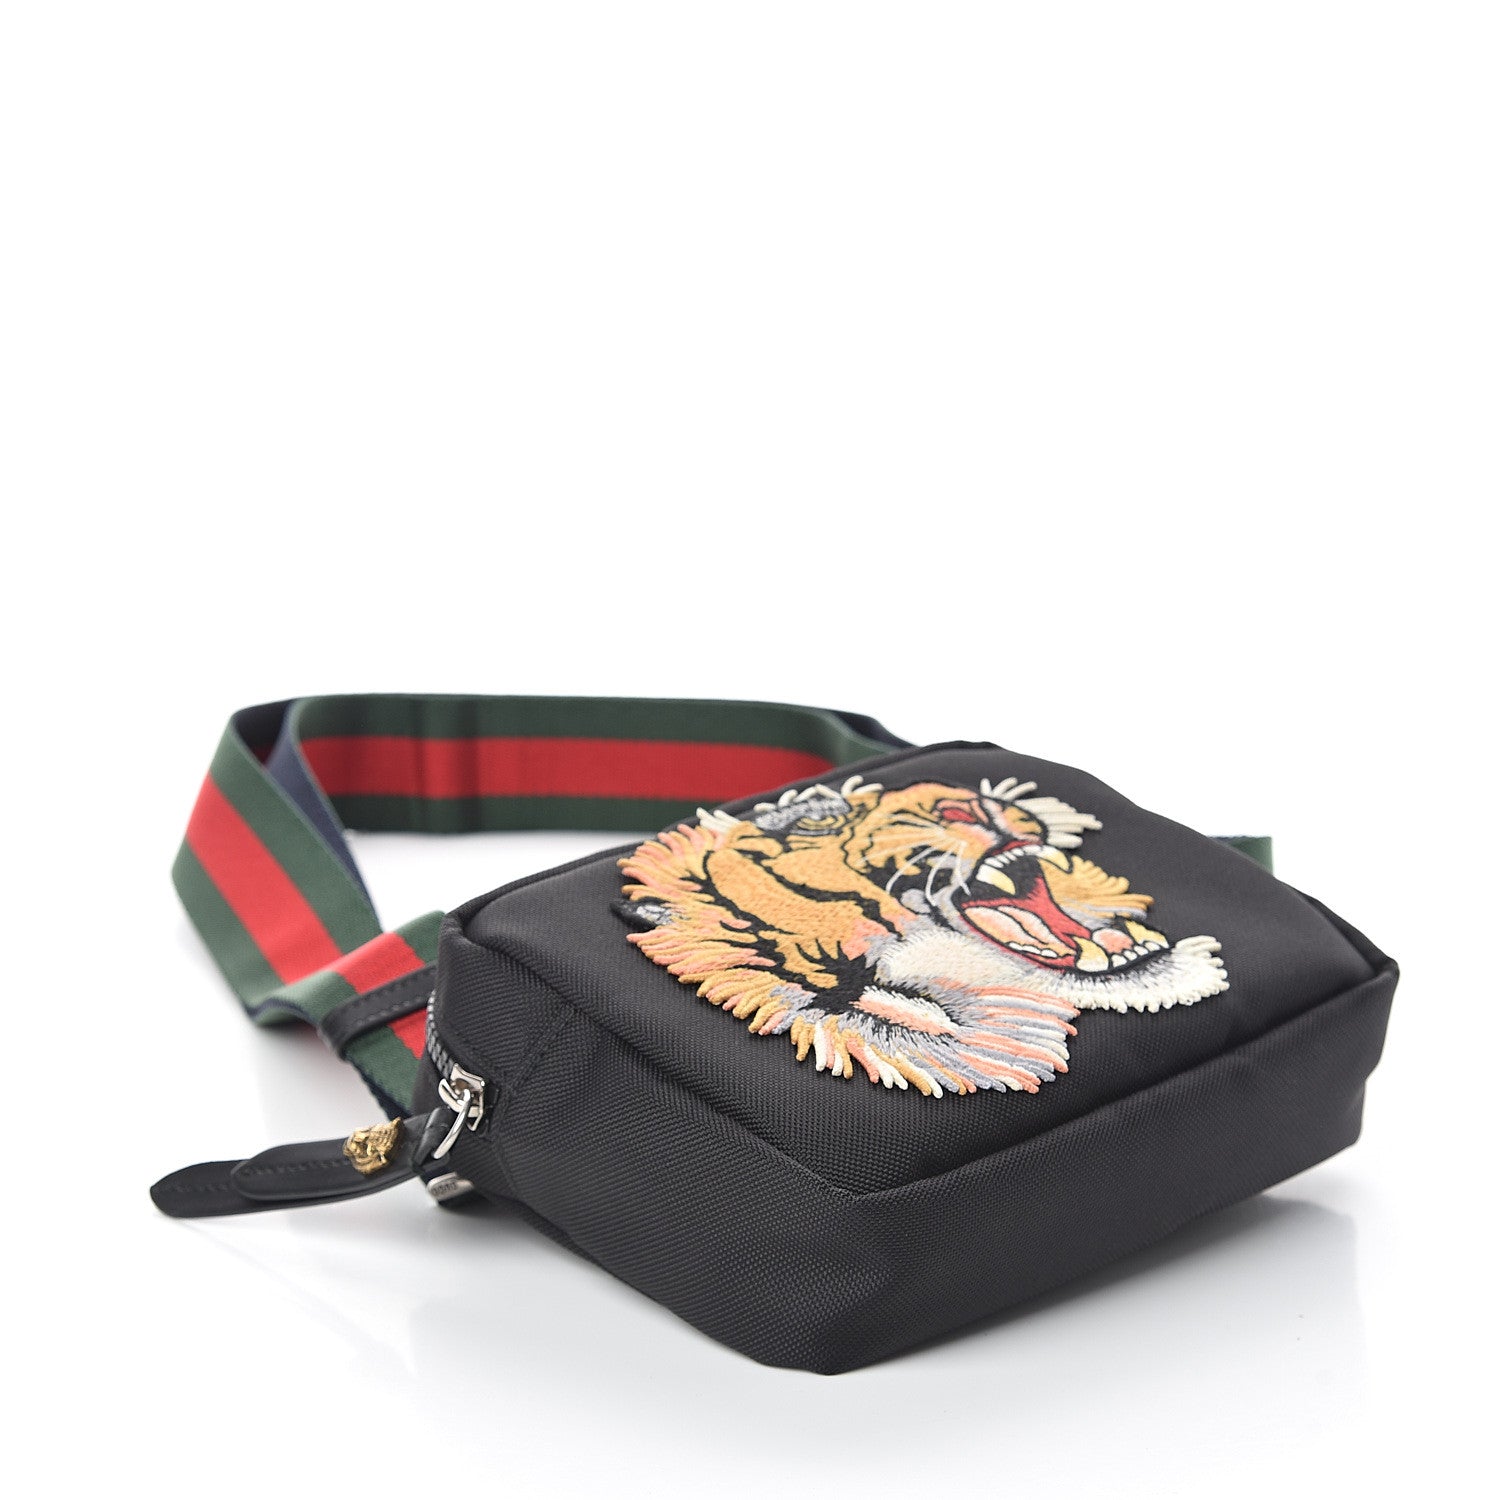 Gucci Stickers Tiger Crossbody Bag - Limited Edition